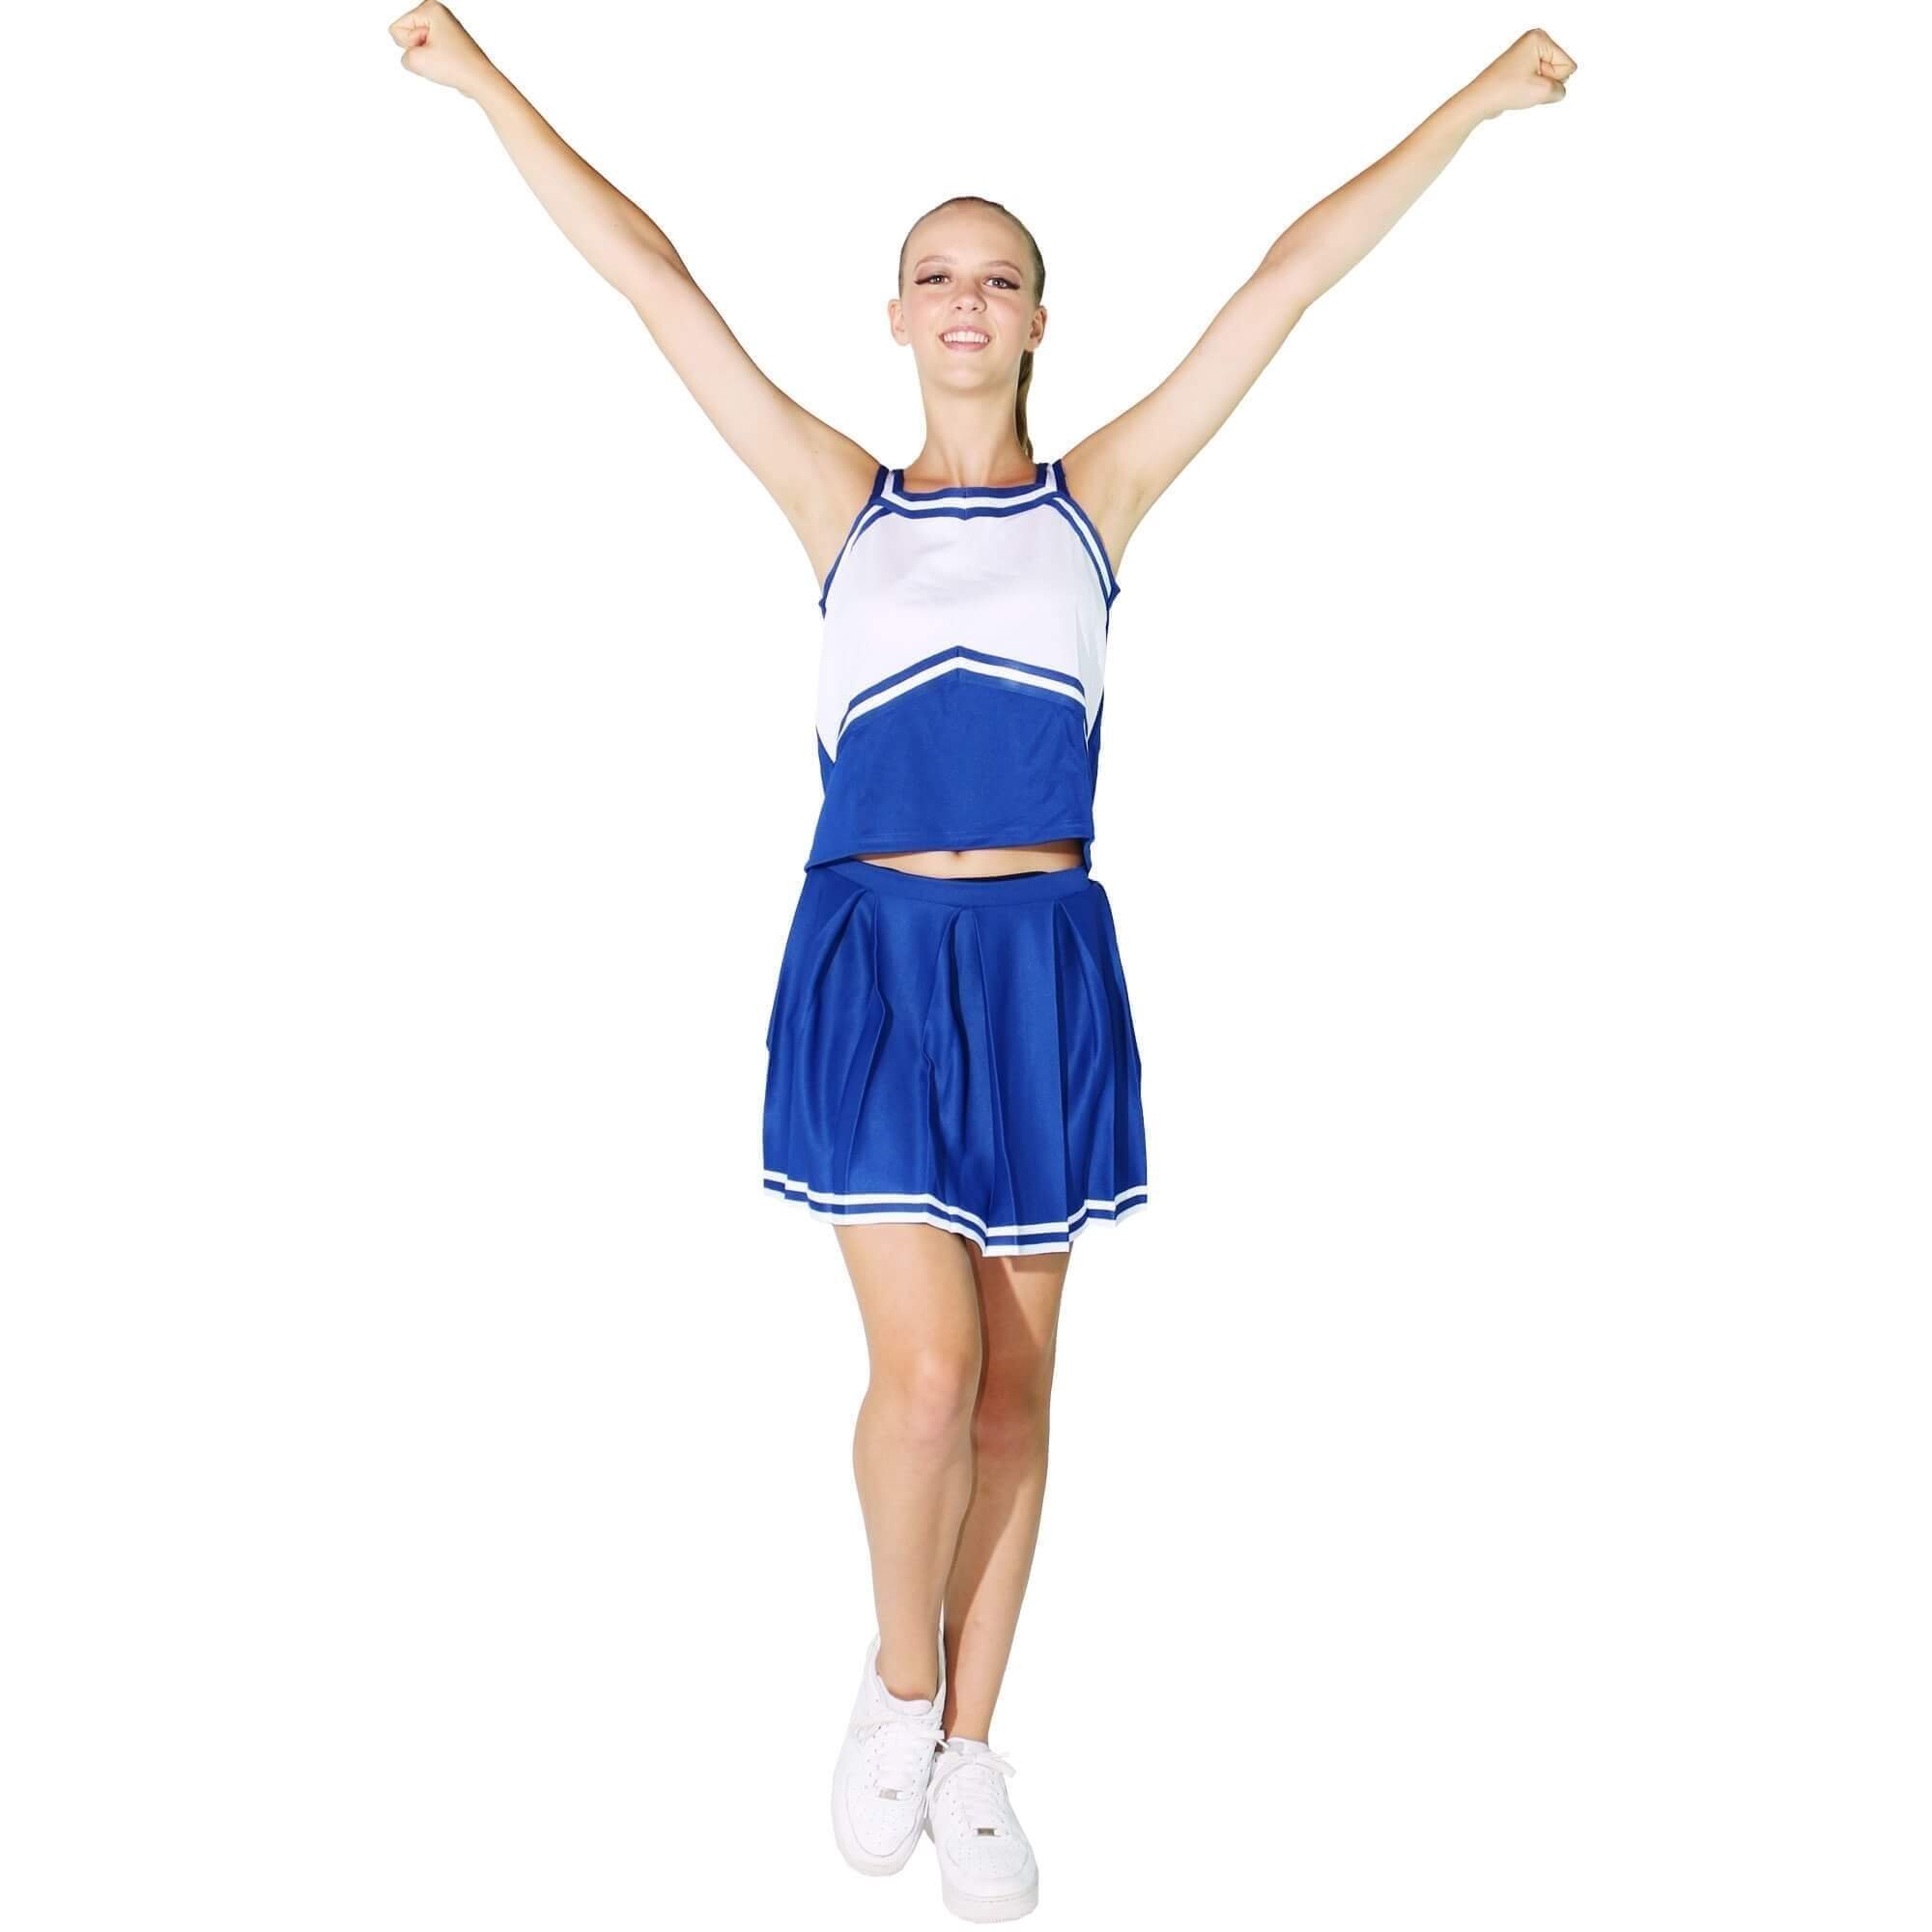 Danzcue Adult Knit Pleat Cheerleading Skirt - Click Image to Close